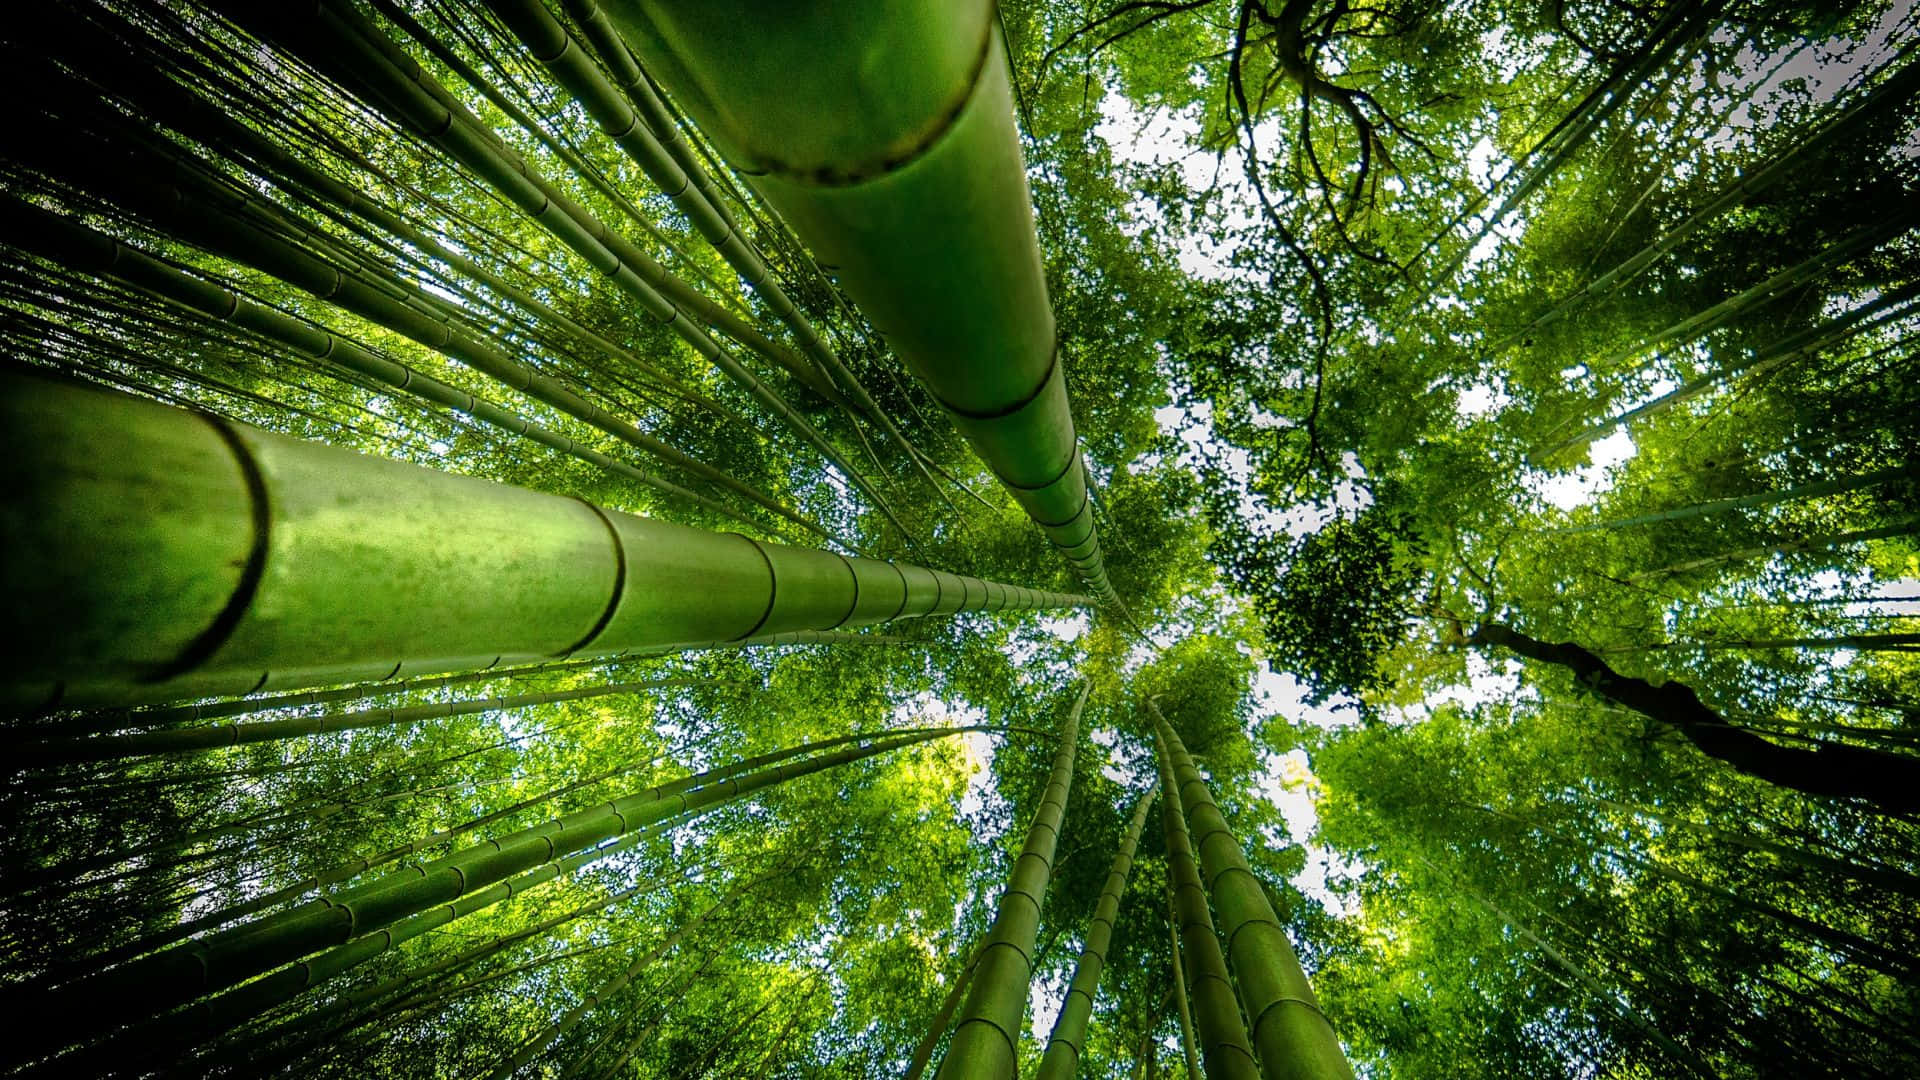 Take A Stroll Through This Enchanted Bamboo Forest